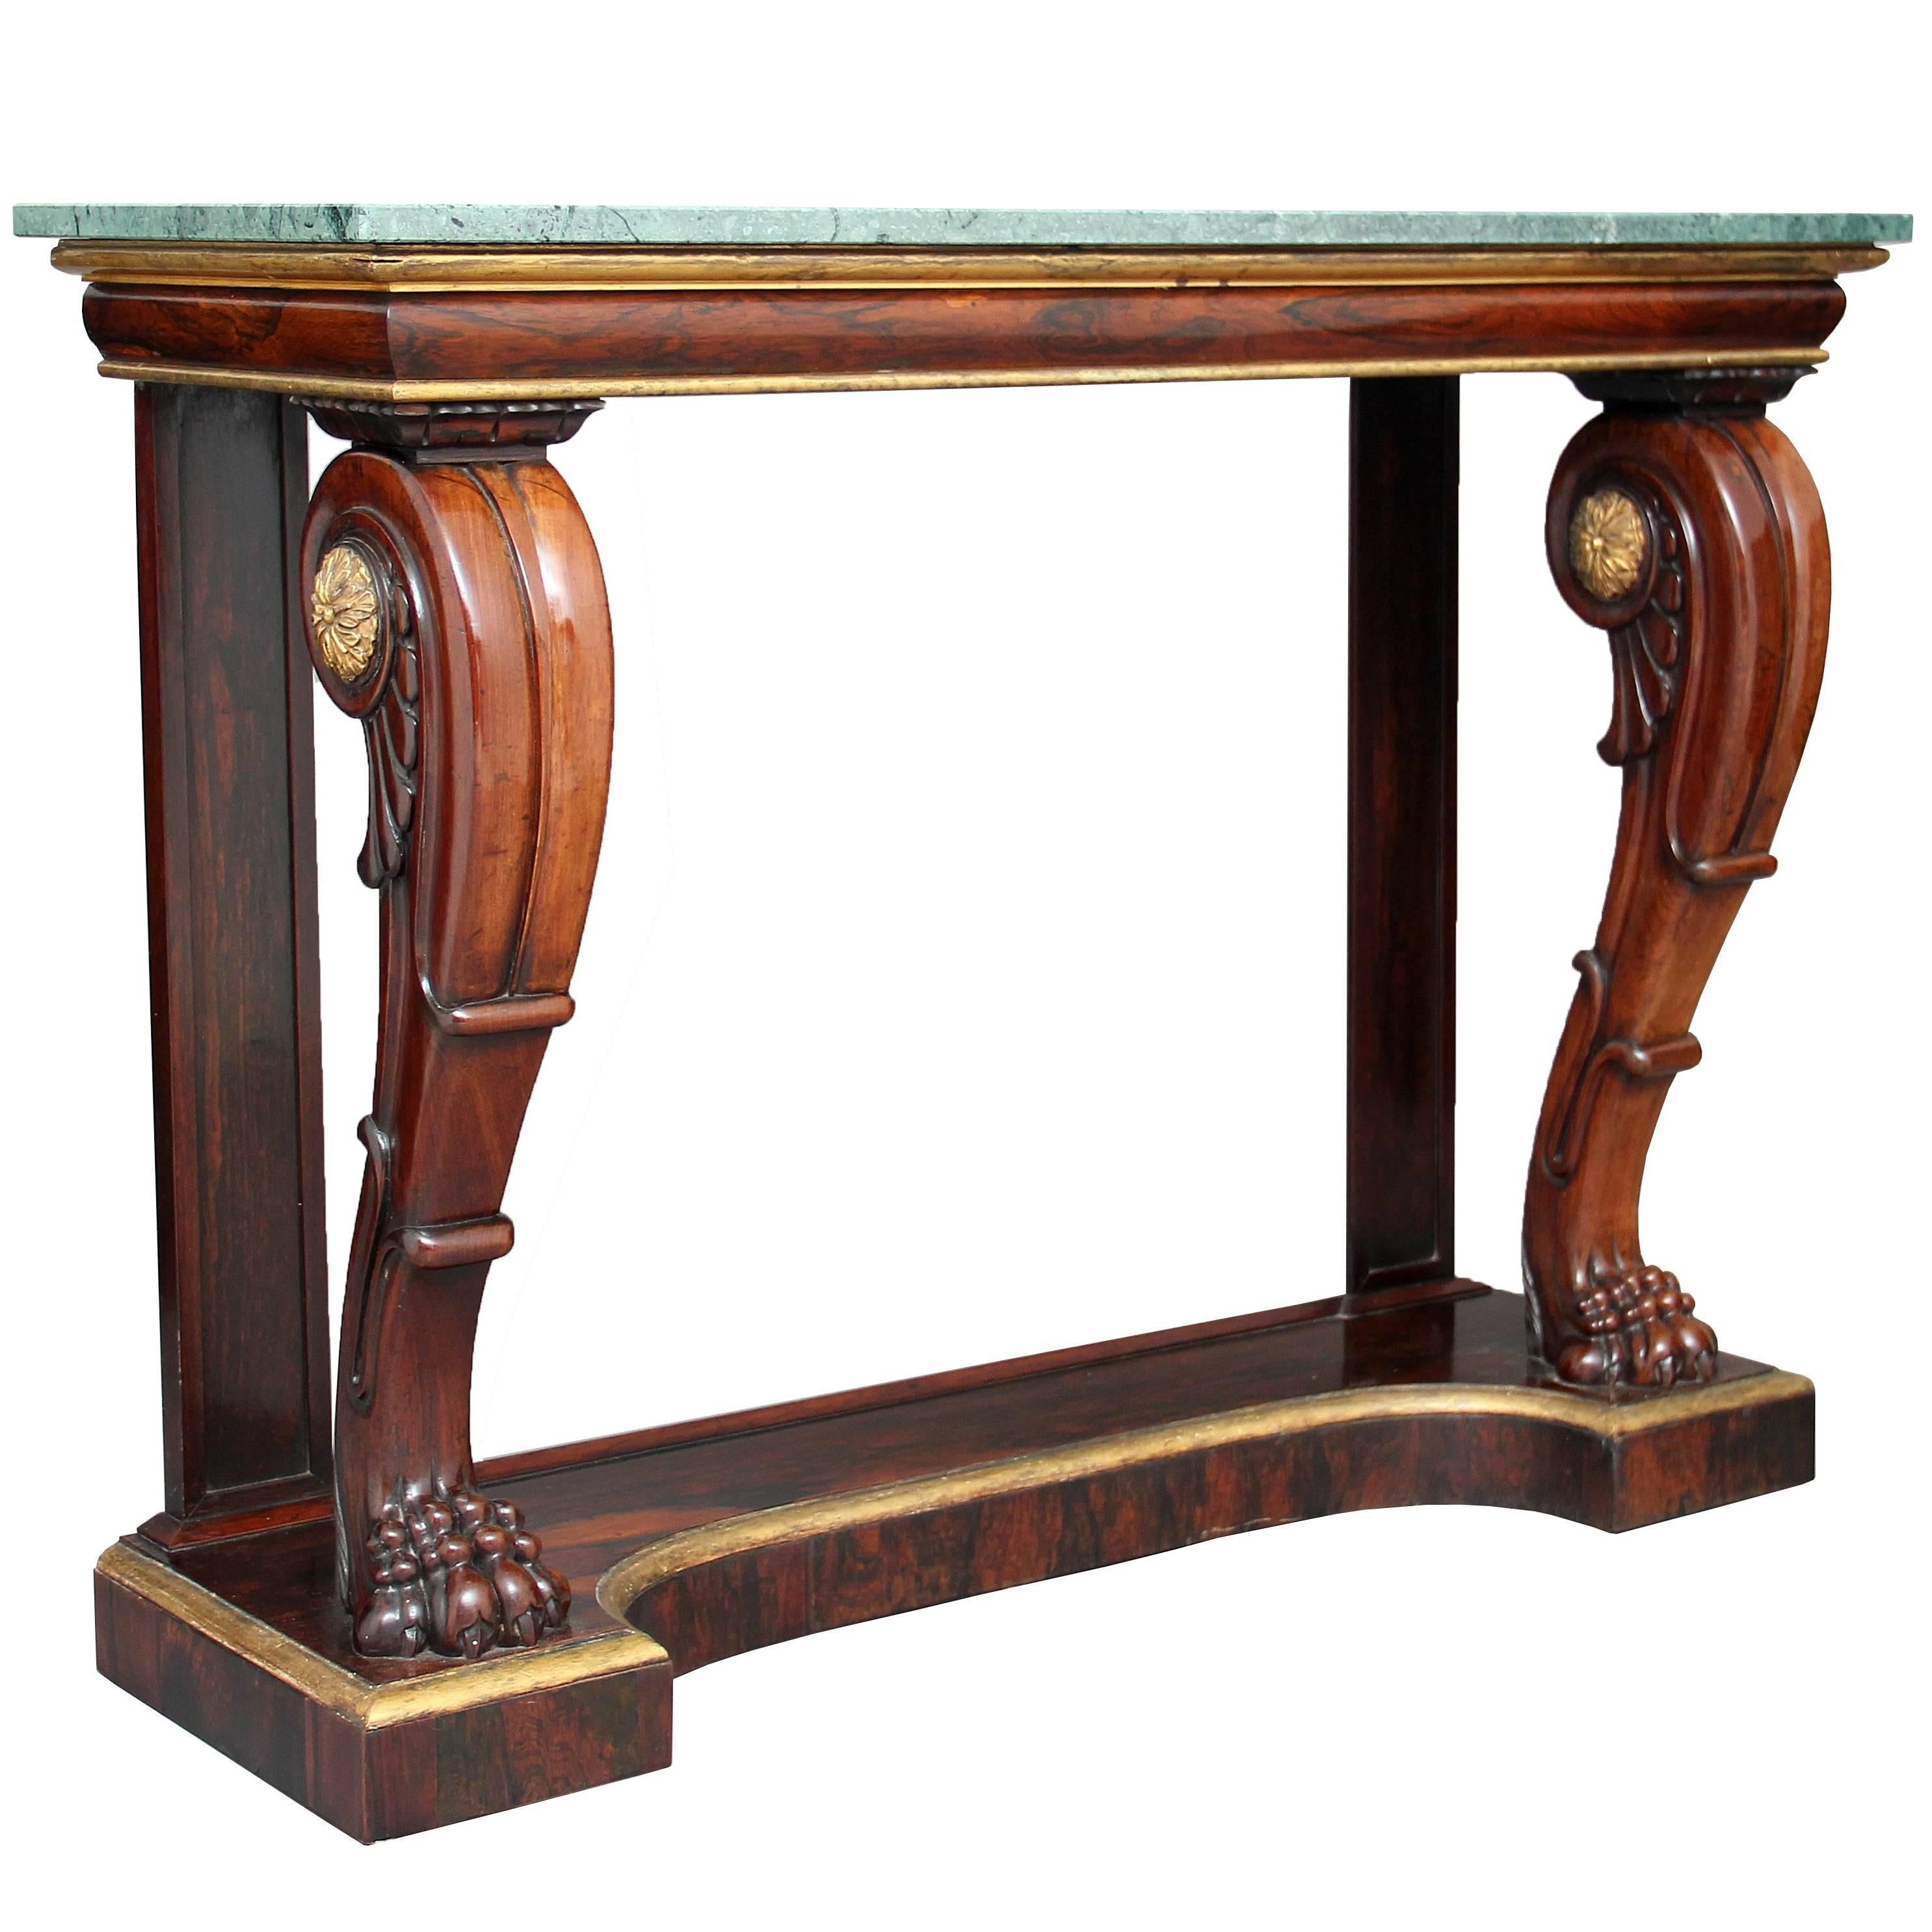 19th Century William IV Rosewood Marble-Top Console Table